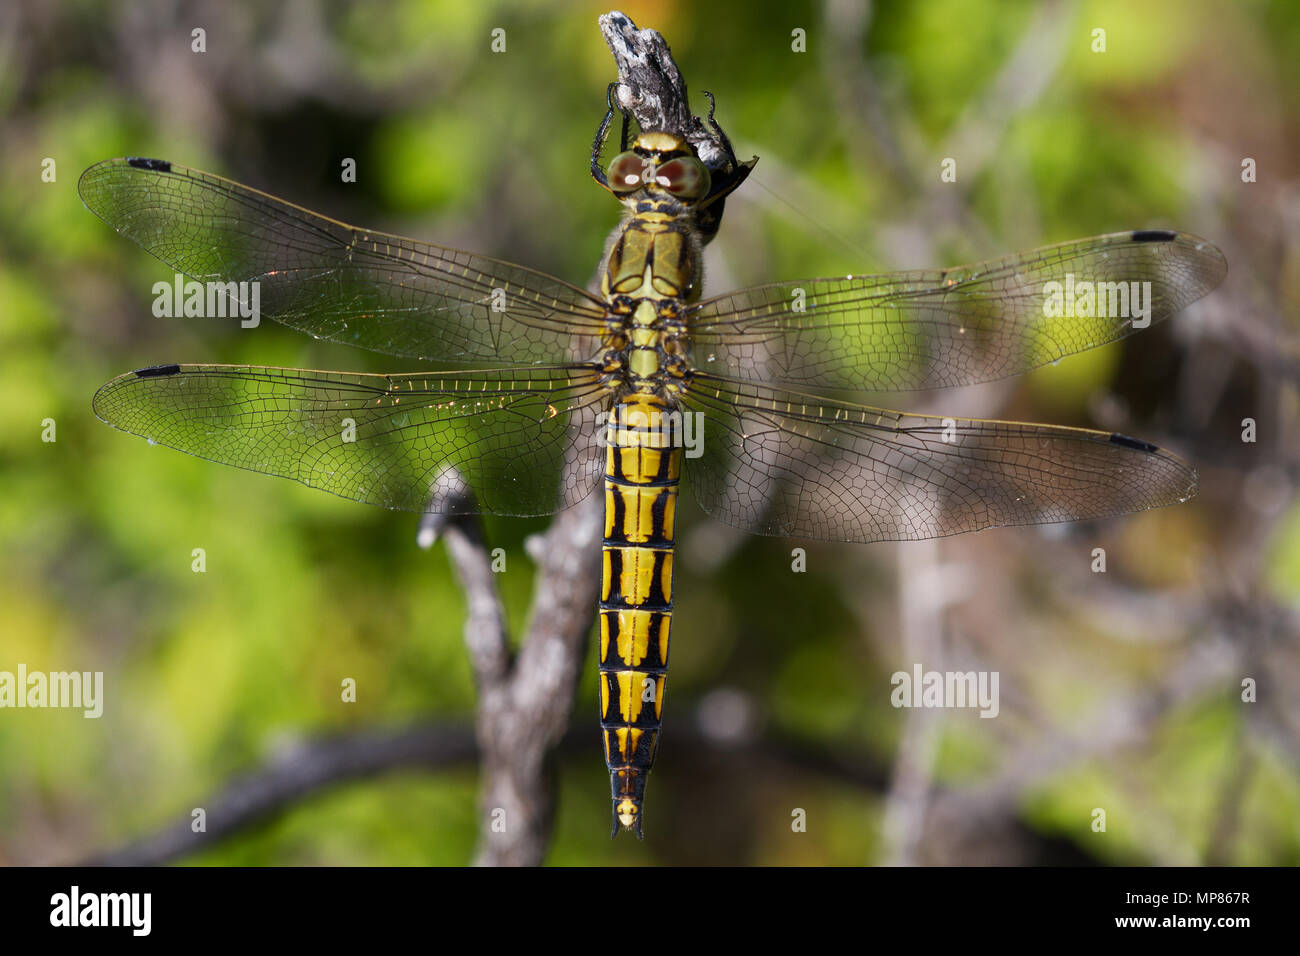 A yellow dragonfly, a female Ruddy darter, Sympetrum sanguineum, resting on a branch Stock Photo